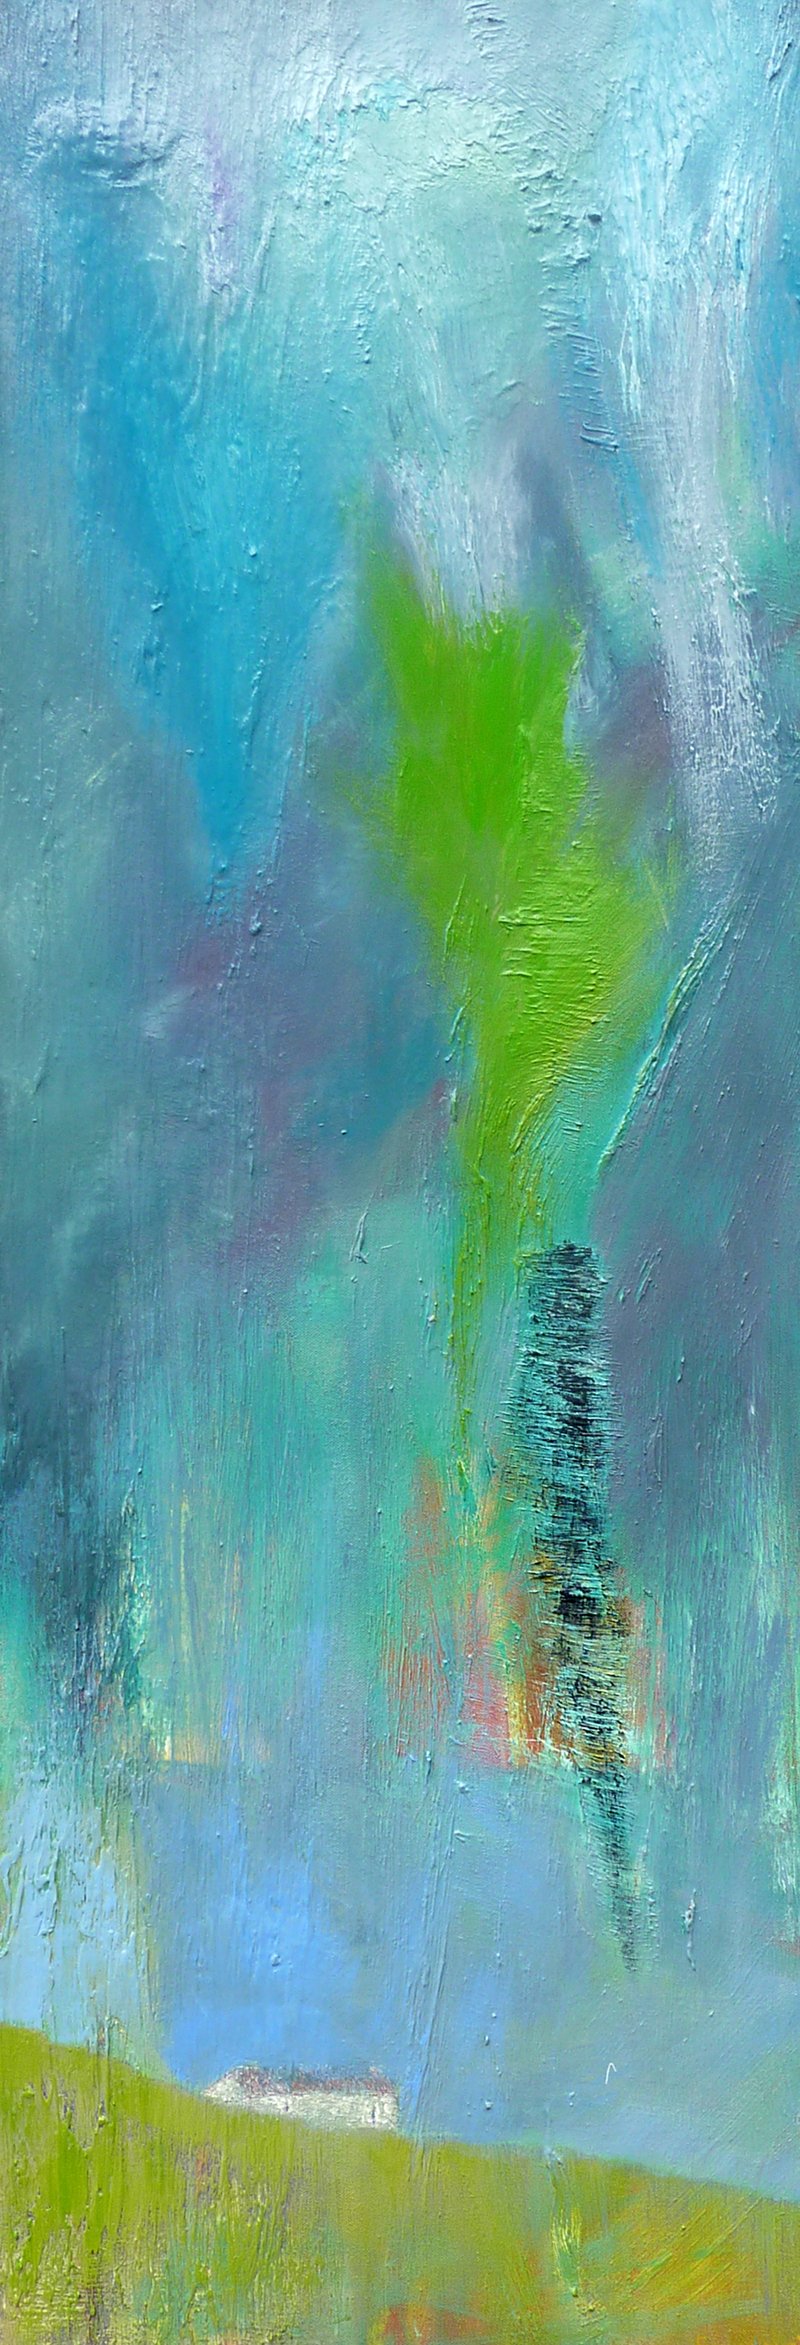 Within Isolation - Oil on Canvas - 122cm x 46cm